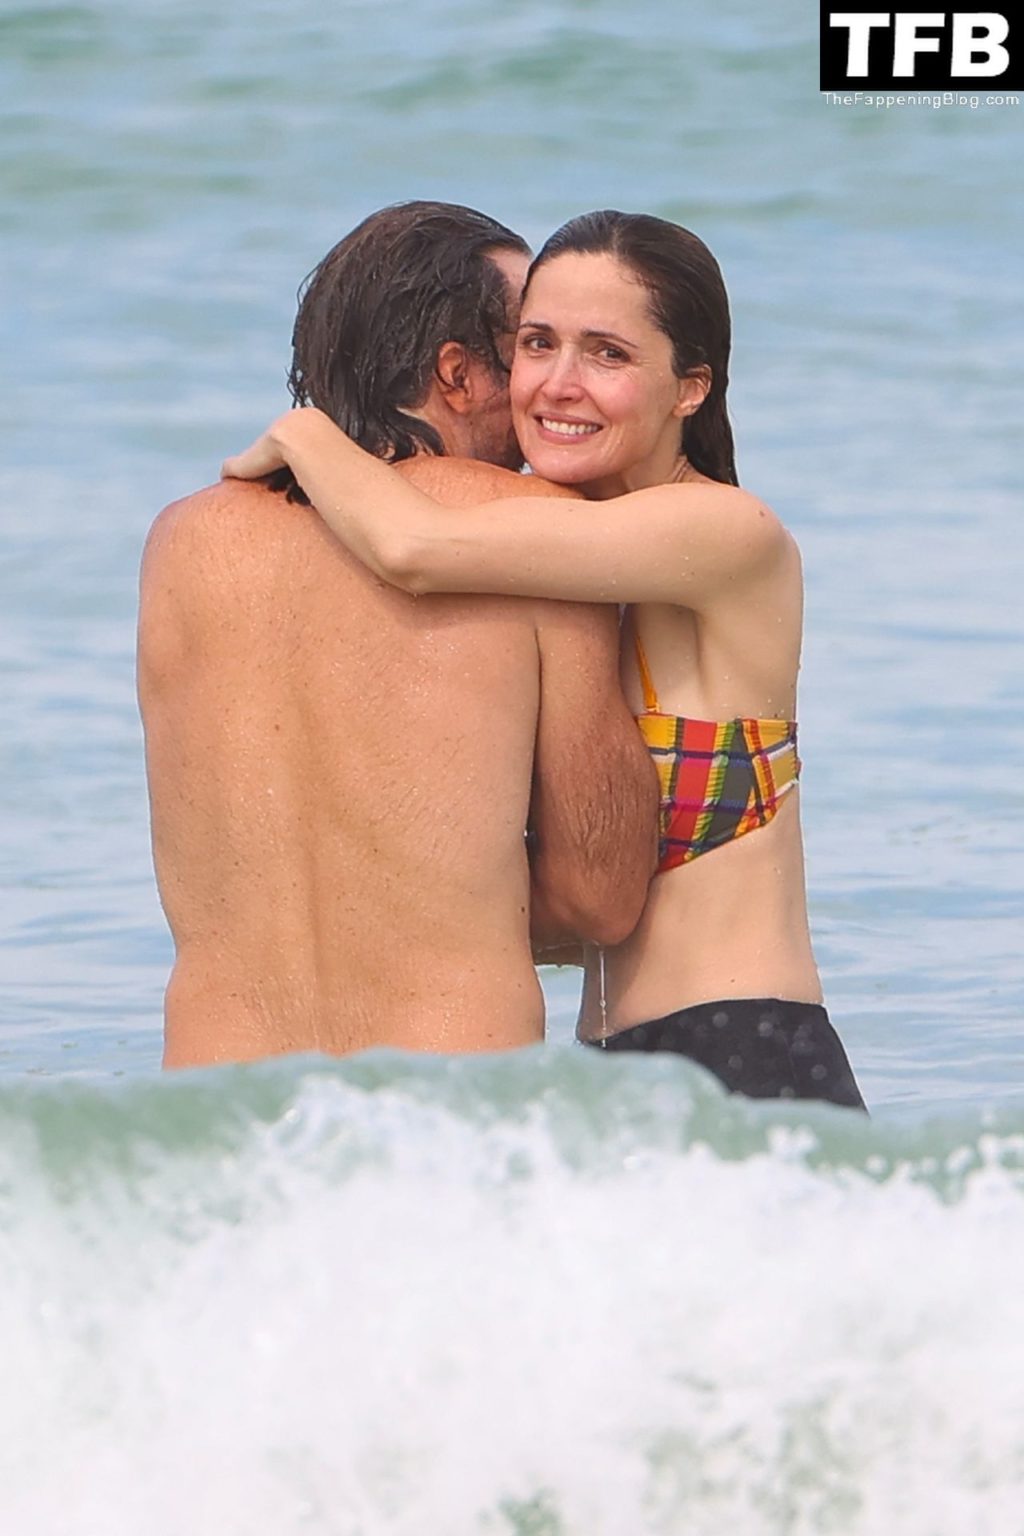 Rose Byrne Sexy The Fappening Blog 10 1024x1536 - Rose Byrne & Kick Gurry Enjoy a Day on the Beach in Sydney (90 Photos)